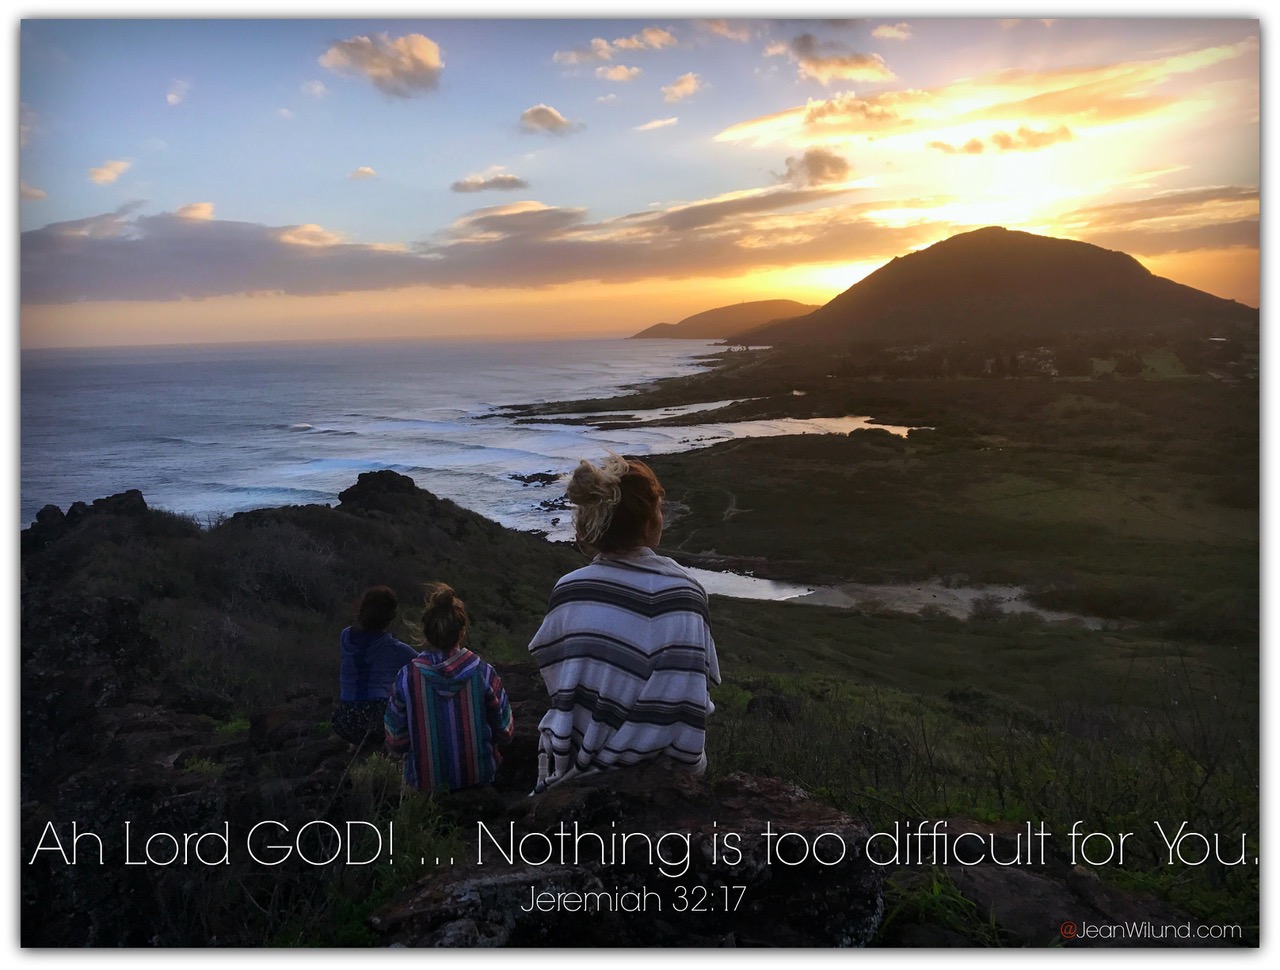 Ah Lord God! Nothing is too difficult for You. That's our hope, joy and promise (Jeremiah 32:17) Praise Picture for the New Year (via www.JeanWilund.com)